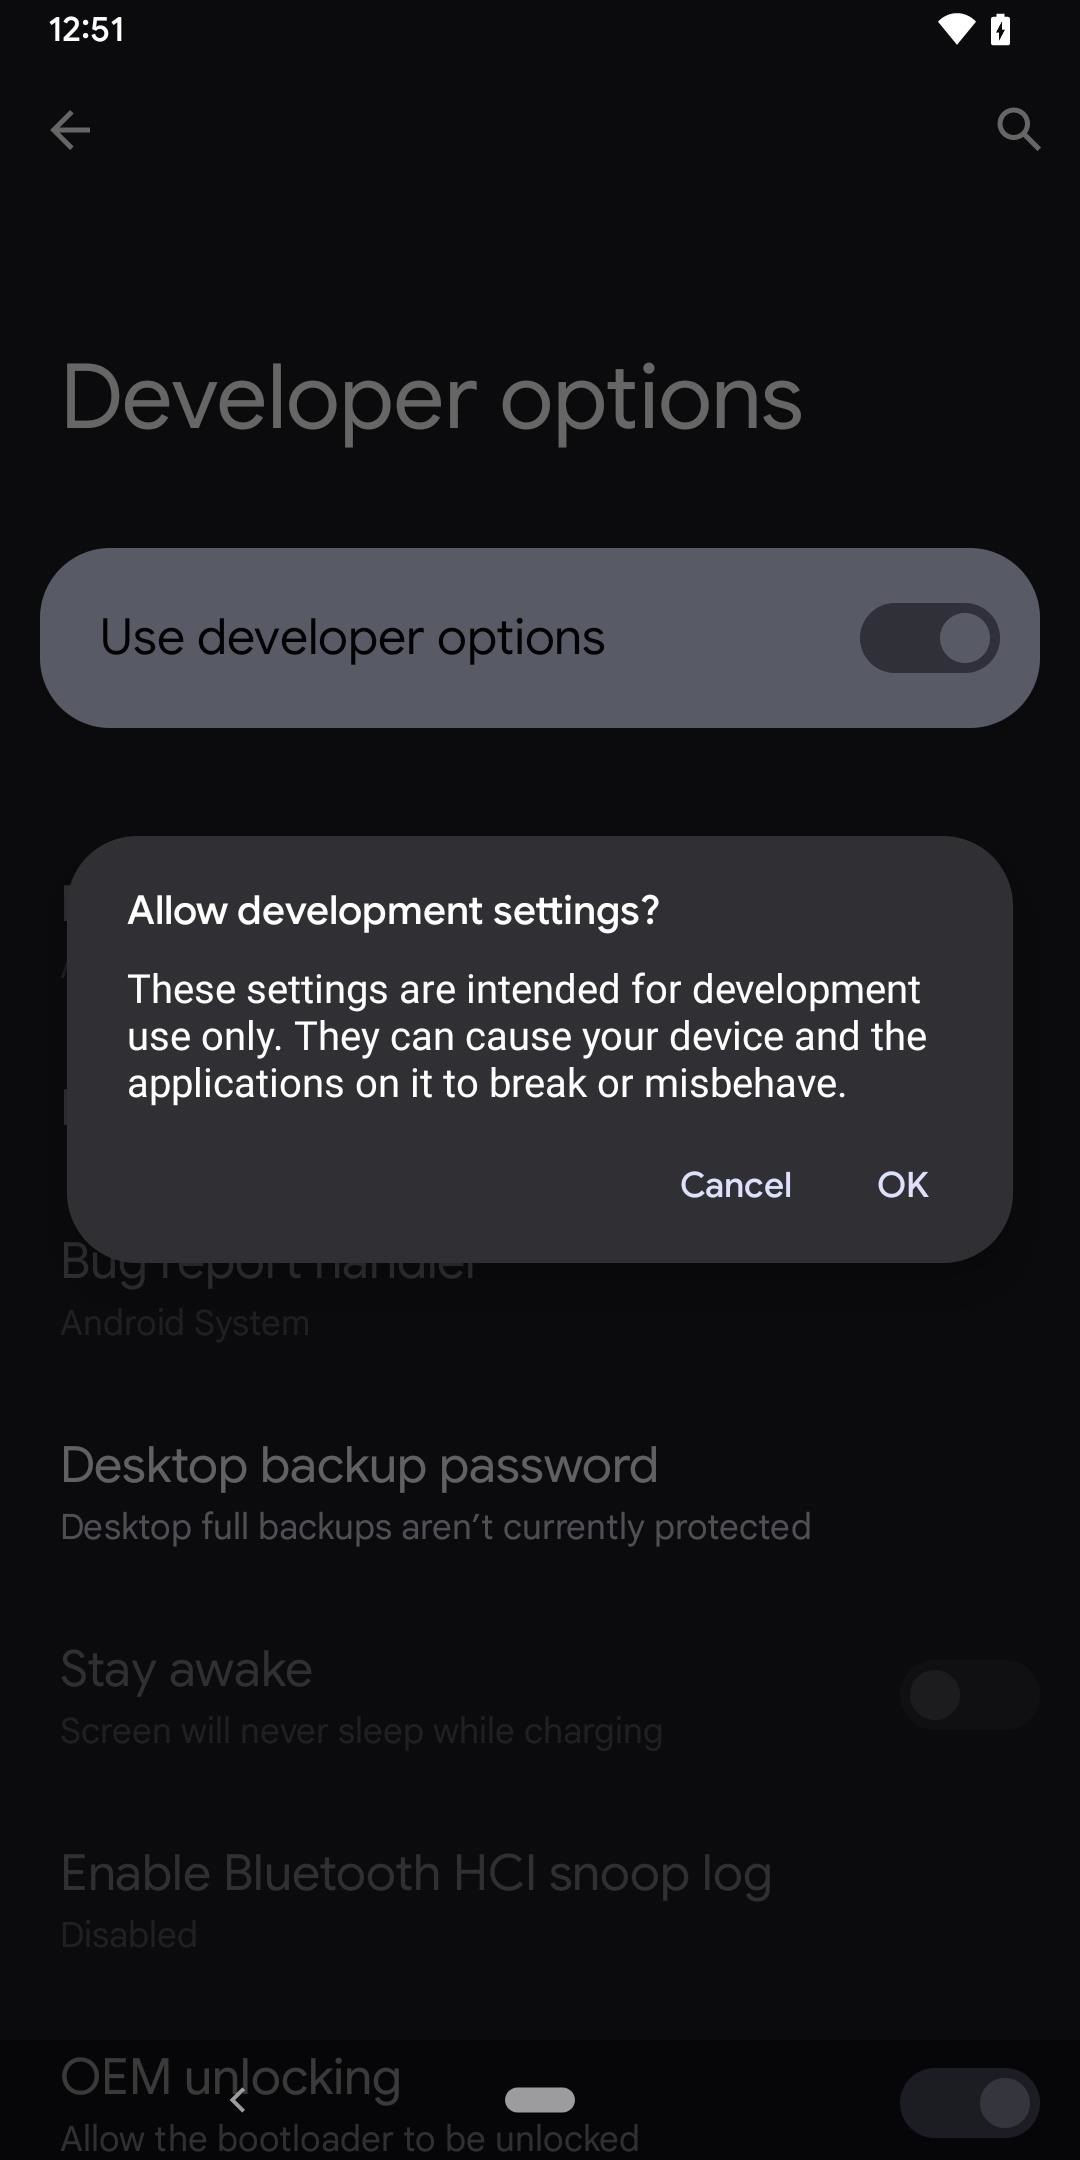 How to Unlock Android 12's Developer Options on Your Pixel for Powerful Hidden Tools Anyone Can Use